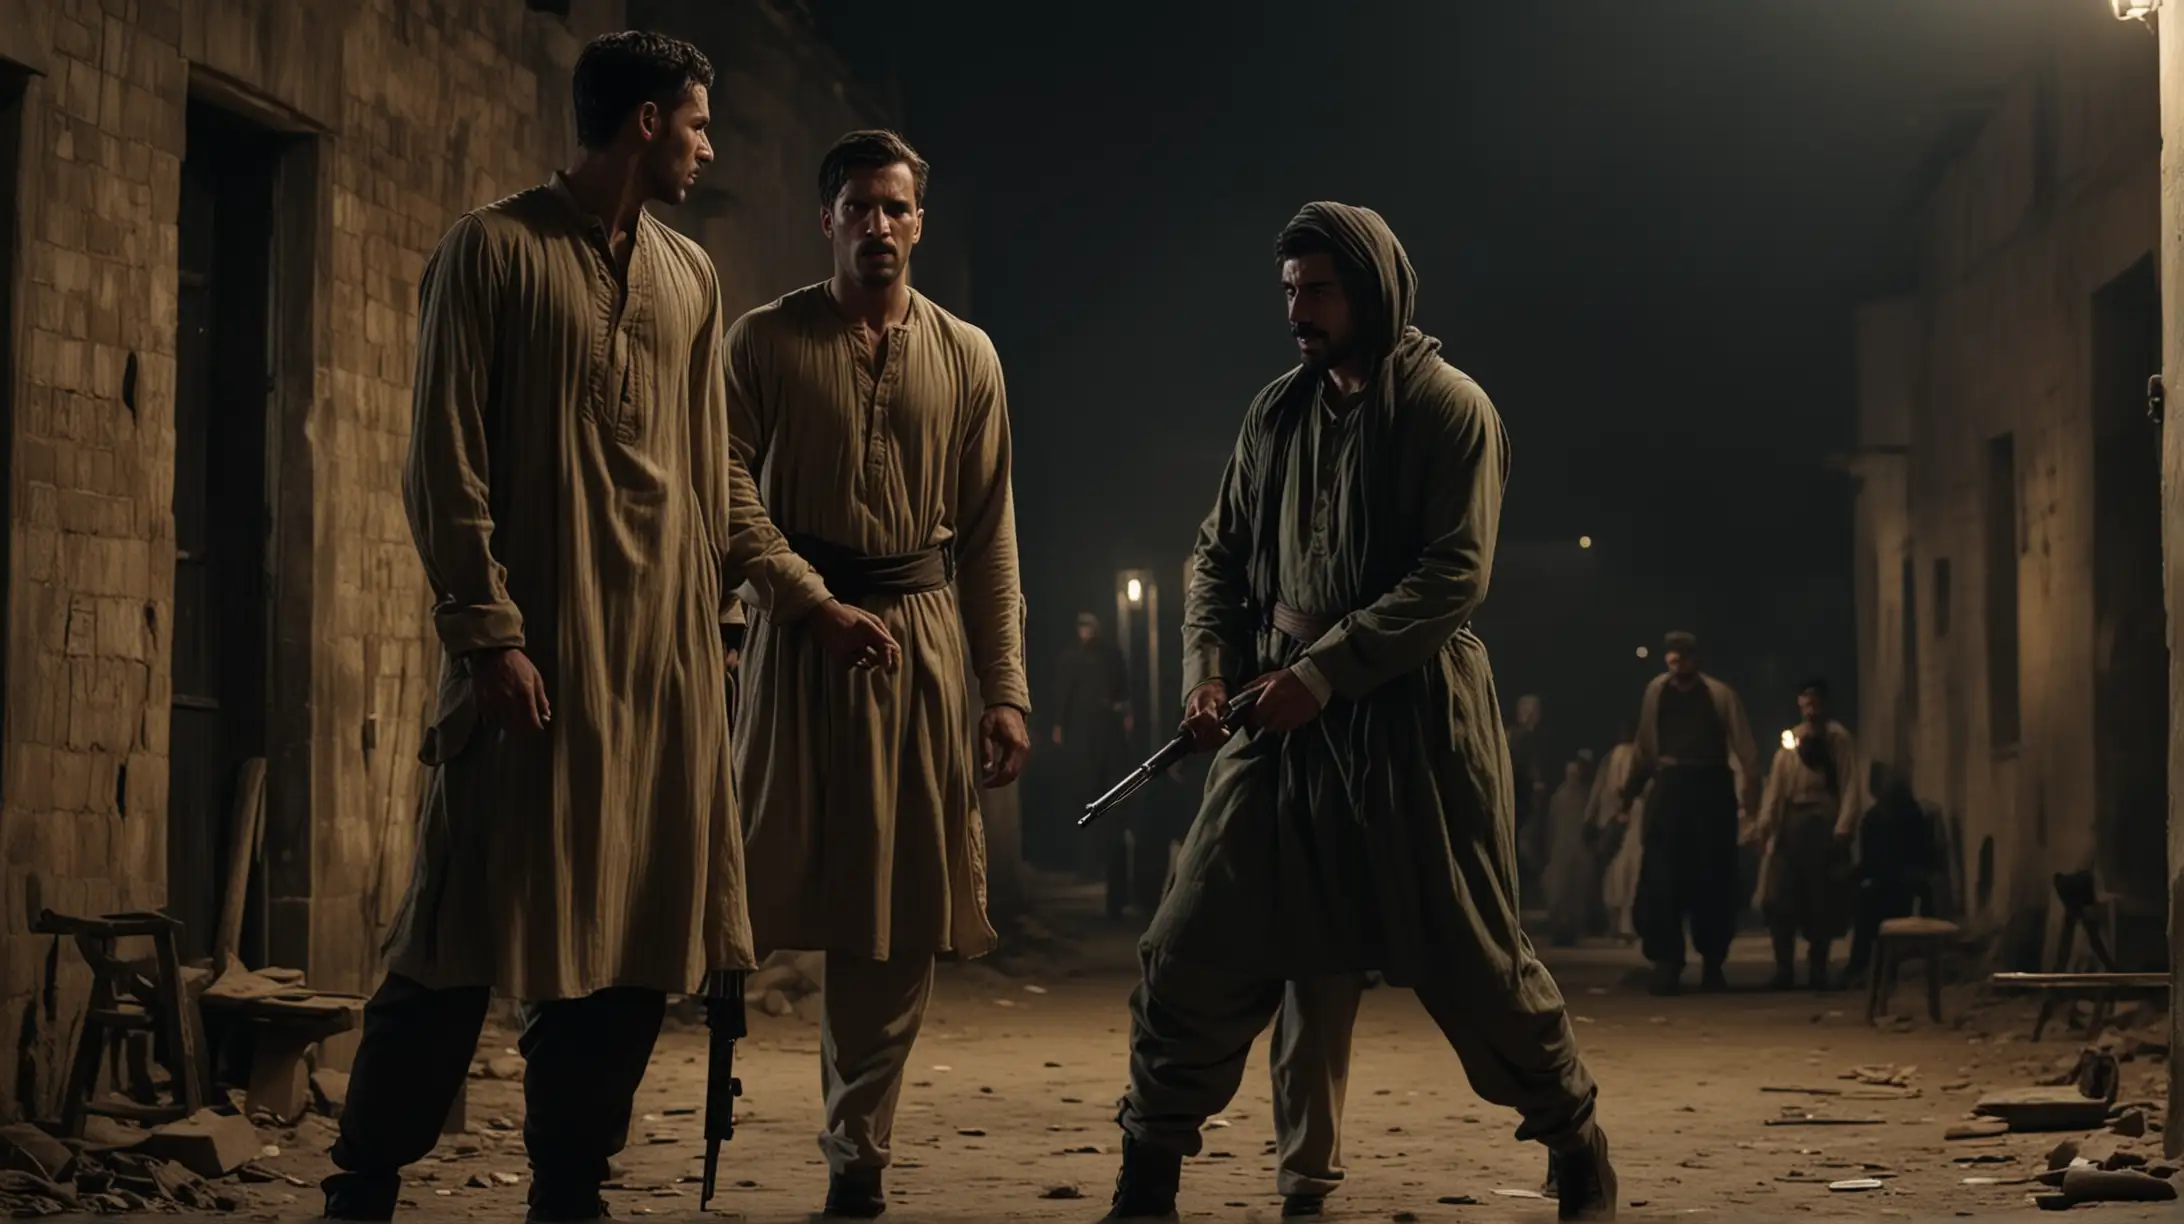 night, dark, neo noir cinematic, generate an image set in the 19th century colonial era, depicting a bleak and gritty scene of European looking British English Soldier in uniform beating torturing a poor Muslim Pakistani man in shalwar kameez what is now Pakistan. shalwar kameez man